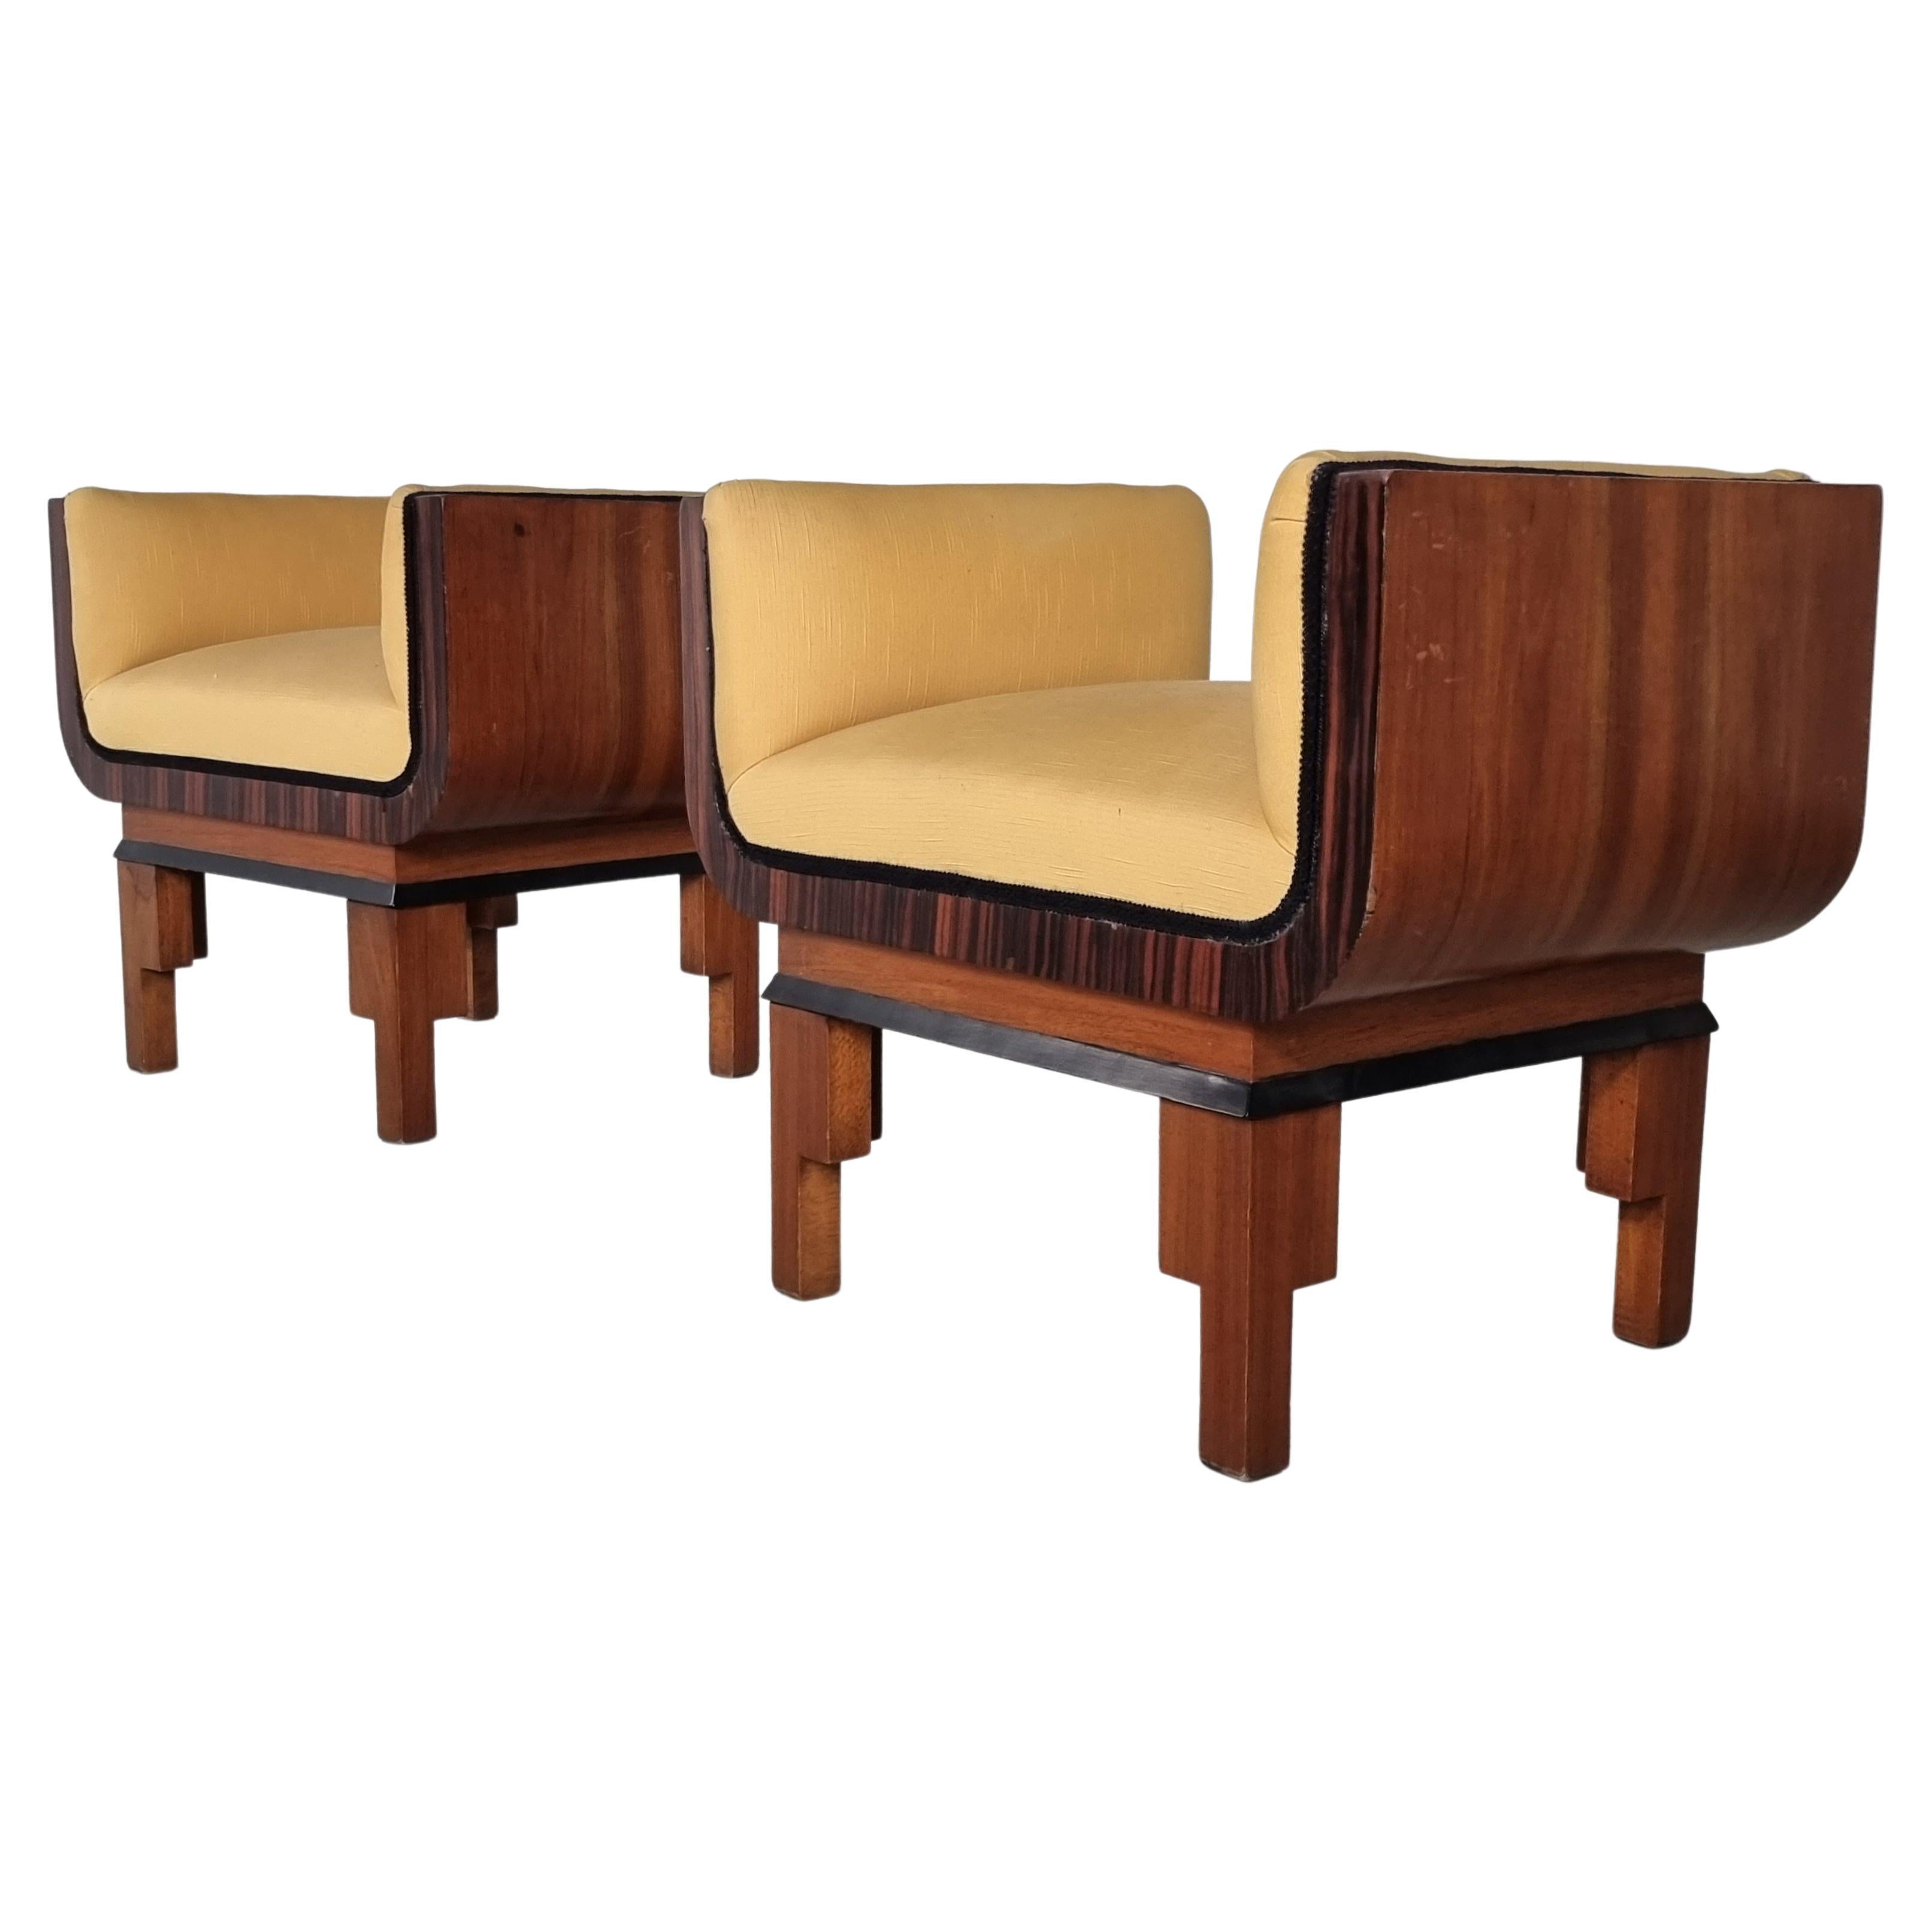 This Pair of Art Deco-style benches from the 1960s. The base is made of walnut and rosewood veneer. The set is perfect if you want to bring a classy look into your home. A timeless piece that is also a perfect complement to the master bedroom at the